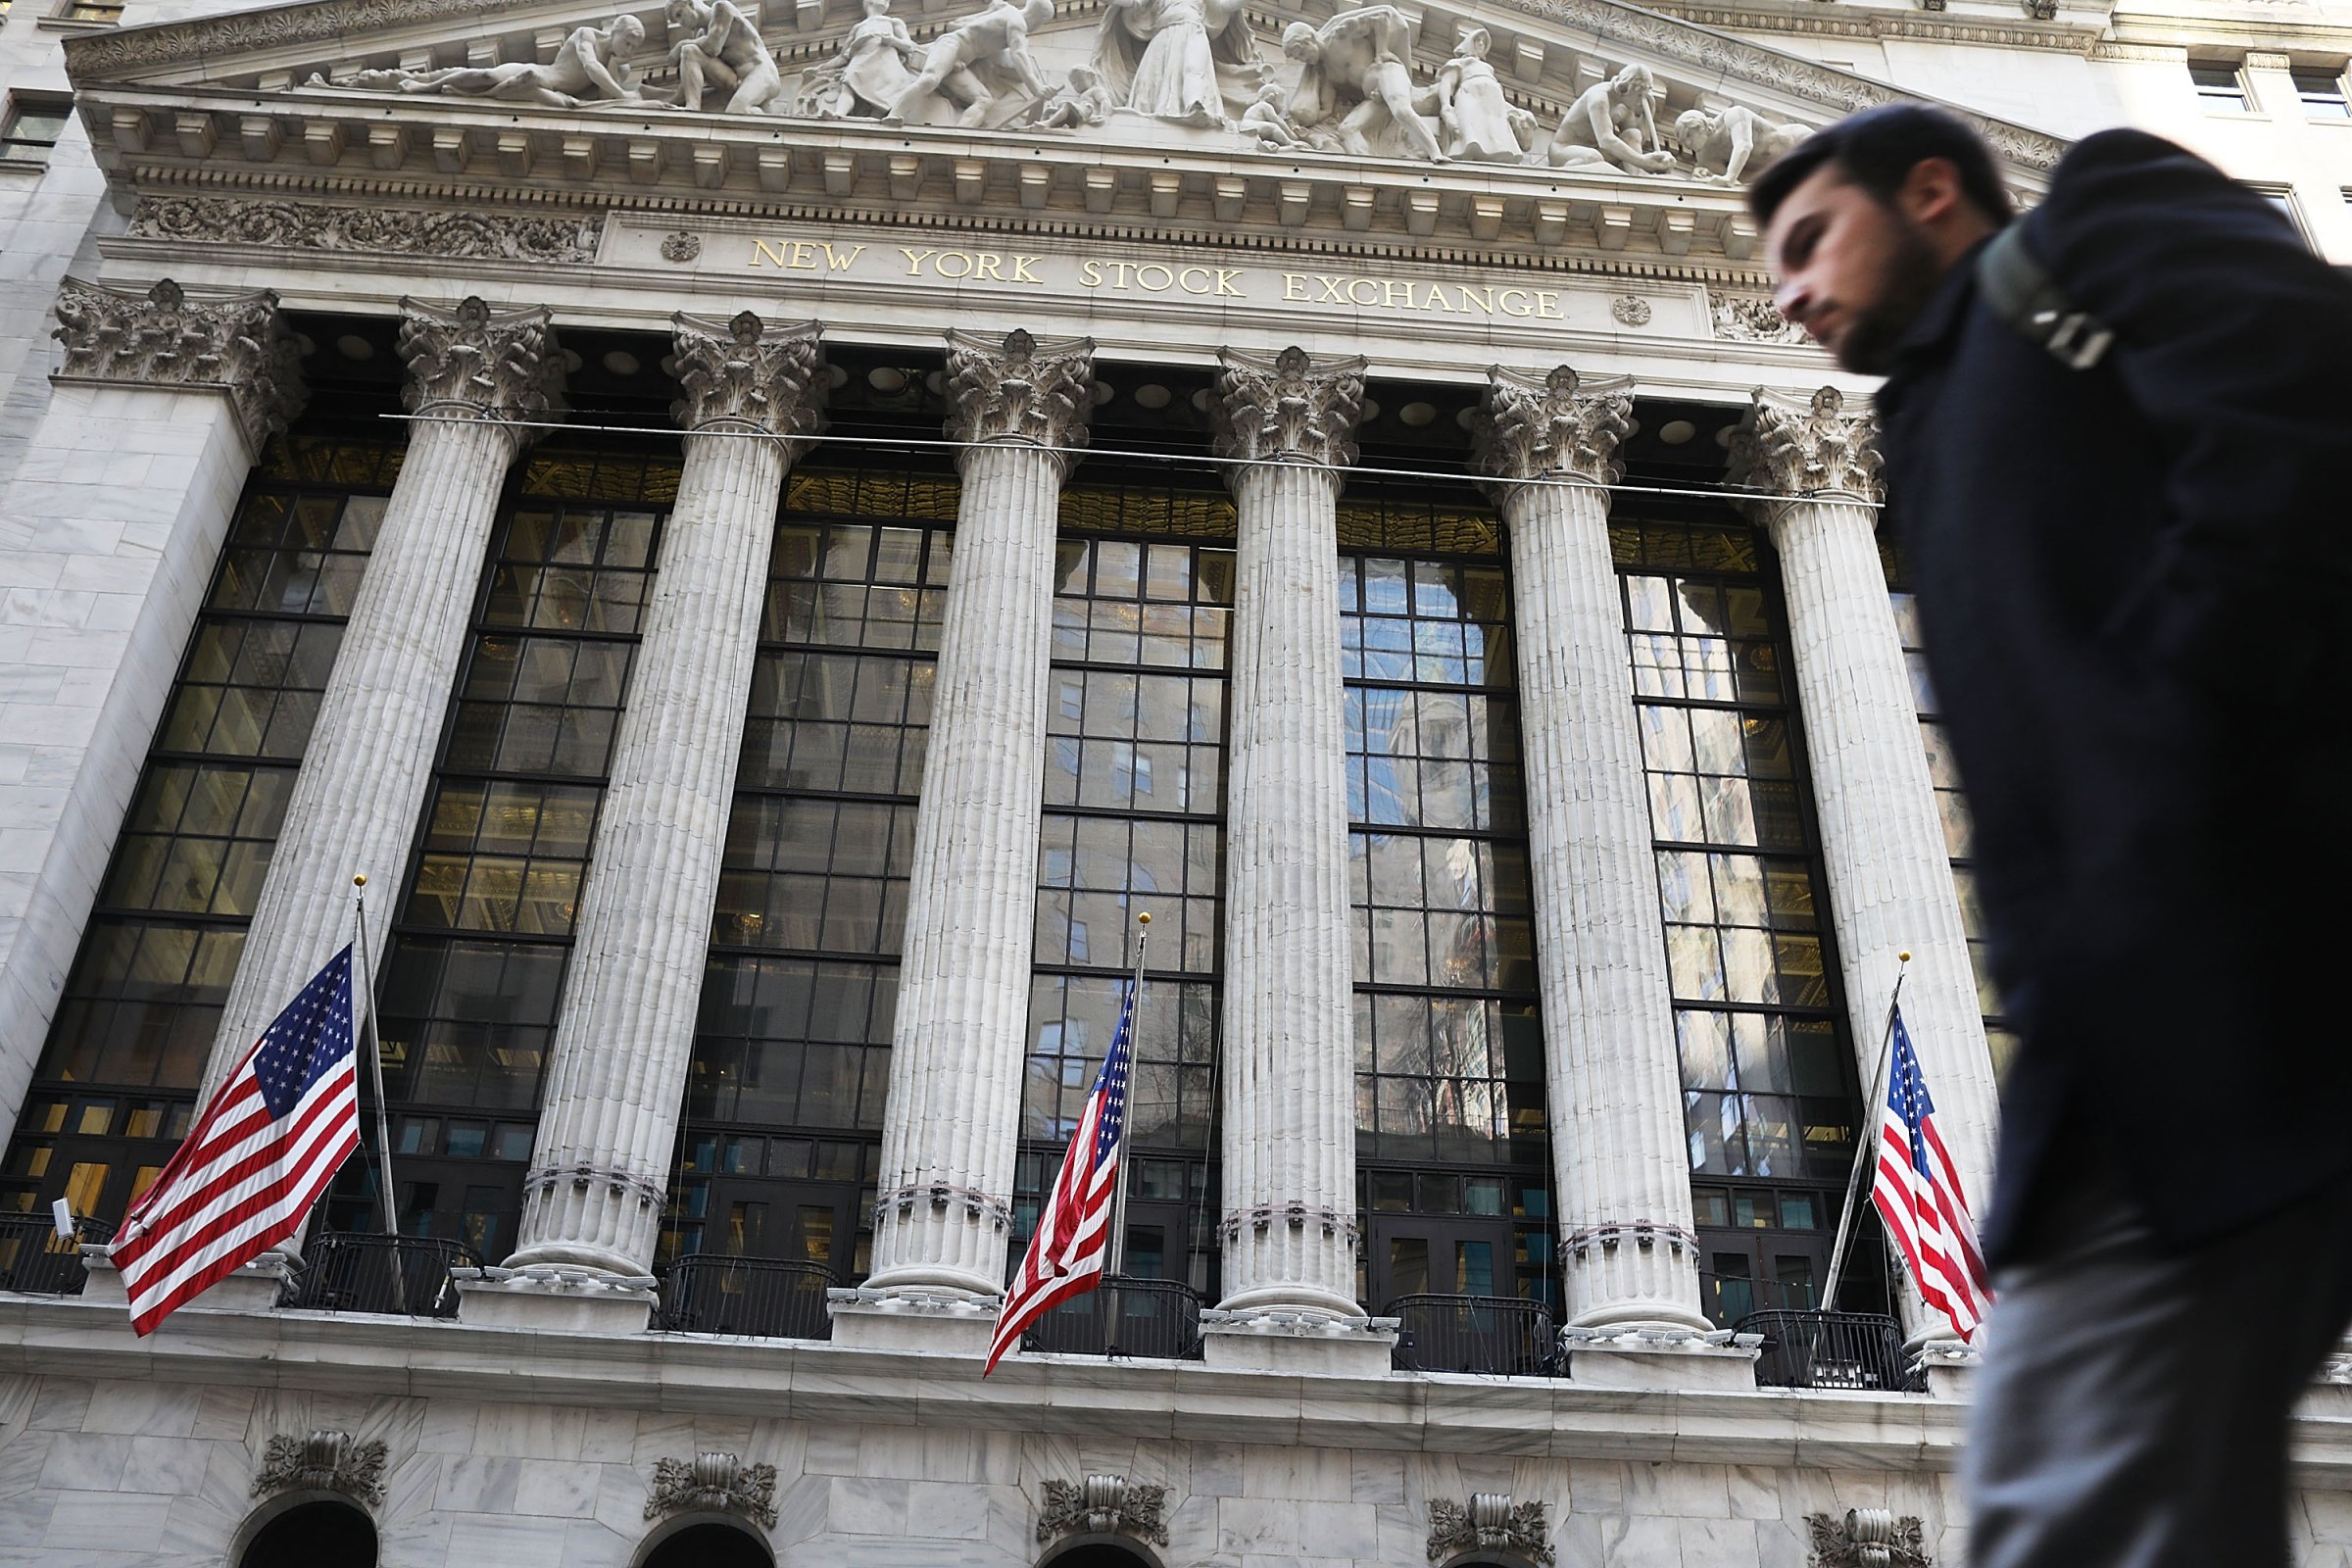 U.S. Markets Open To Continued Expected Recovery